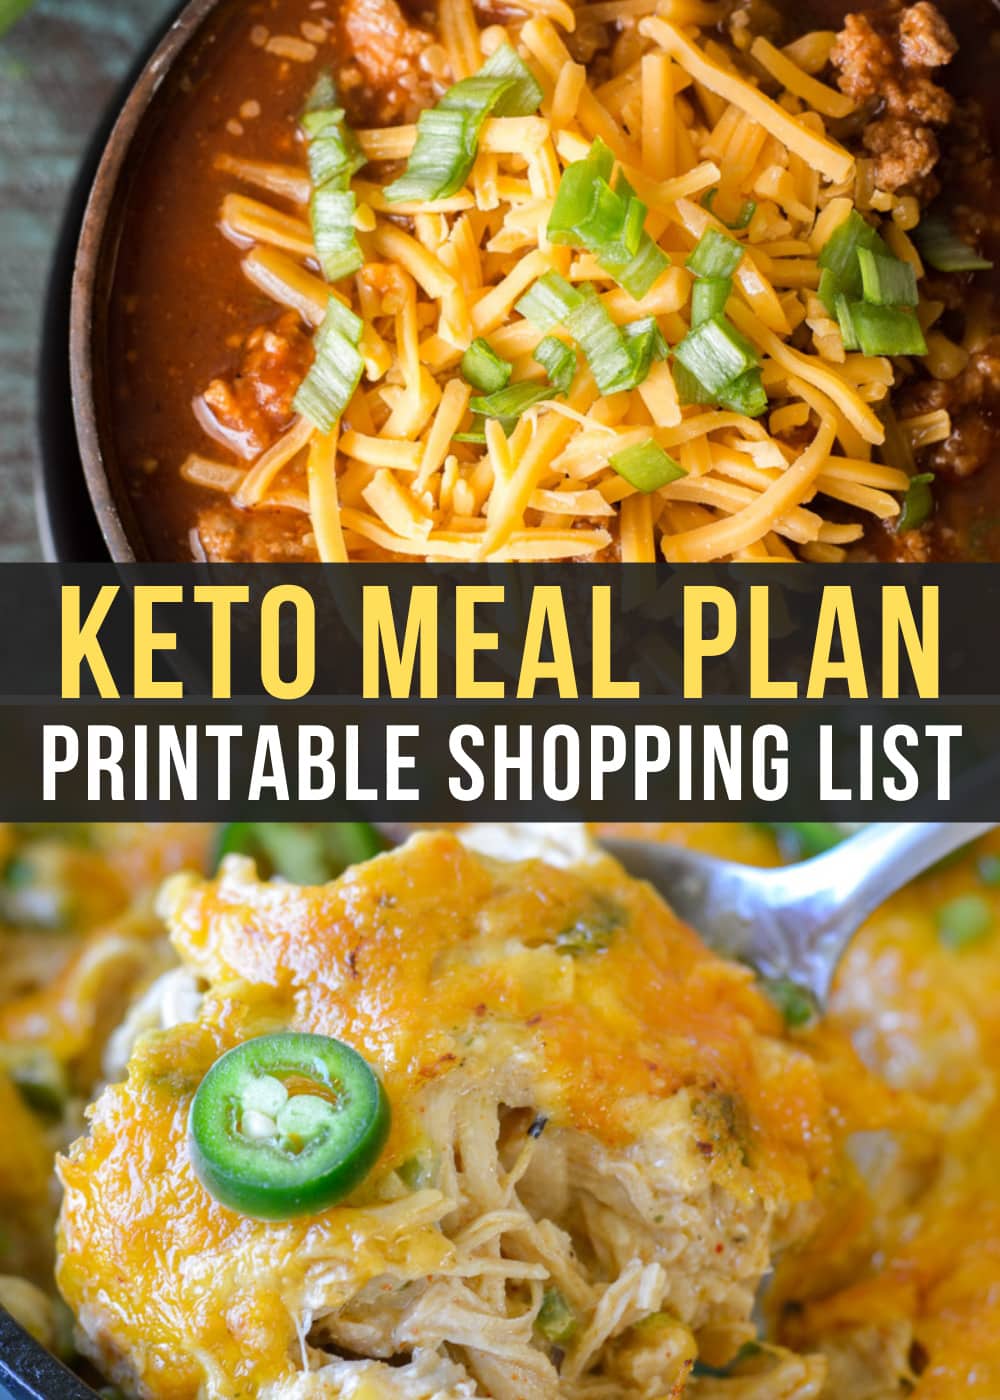 Week 22 of the Easy Keto Meal Plan includes delicious low-carb meals like Easy Keto Chili and Jalapeno Popper Chicken Skillet!